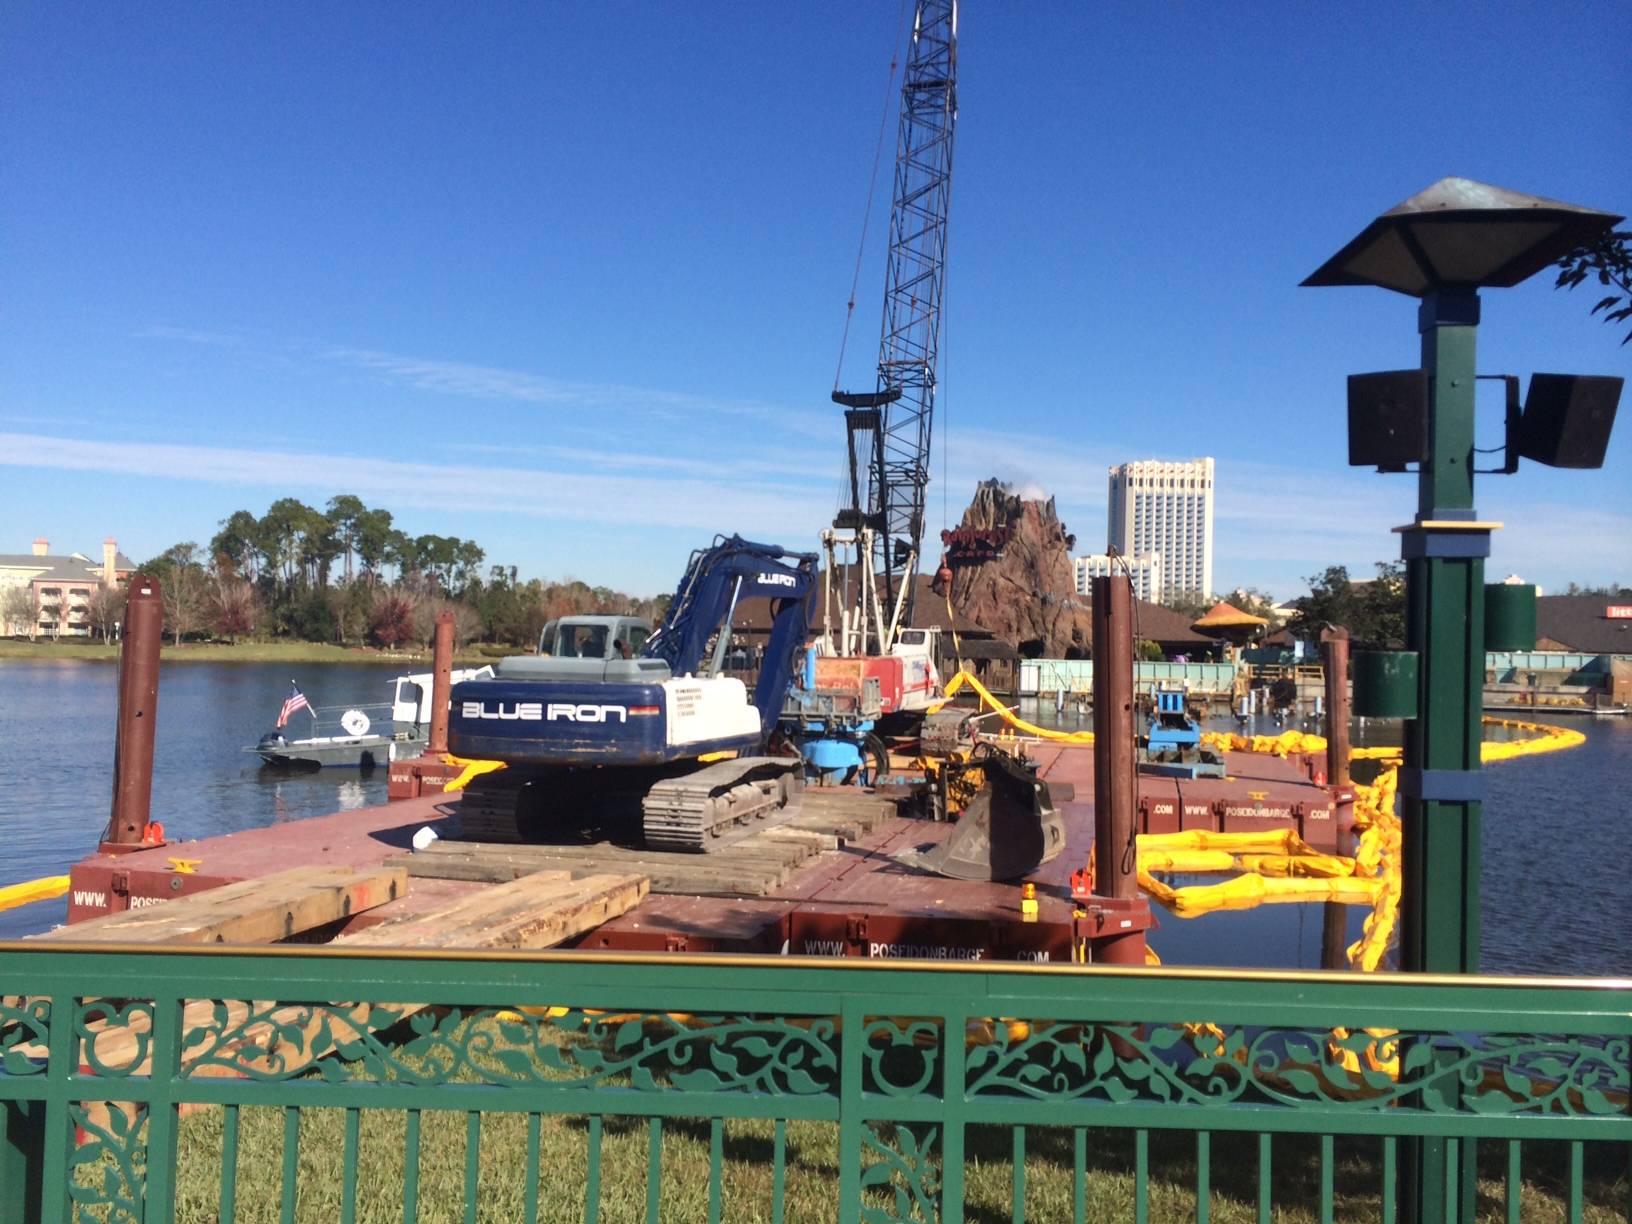 PHOTOS - Barge-based cranes take up position in the Downtown Disney Village Lake to begin the Marketplace Causeway bridge